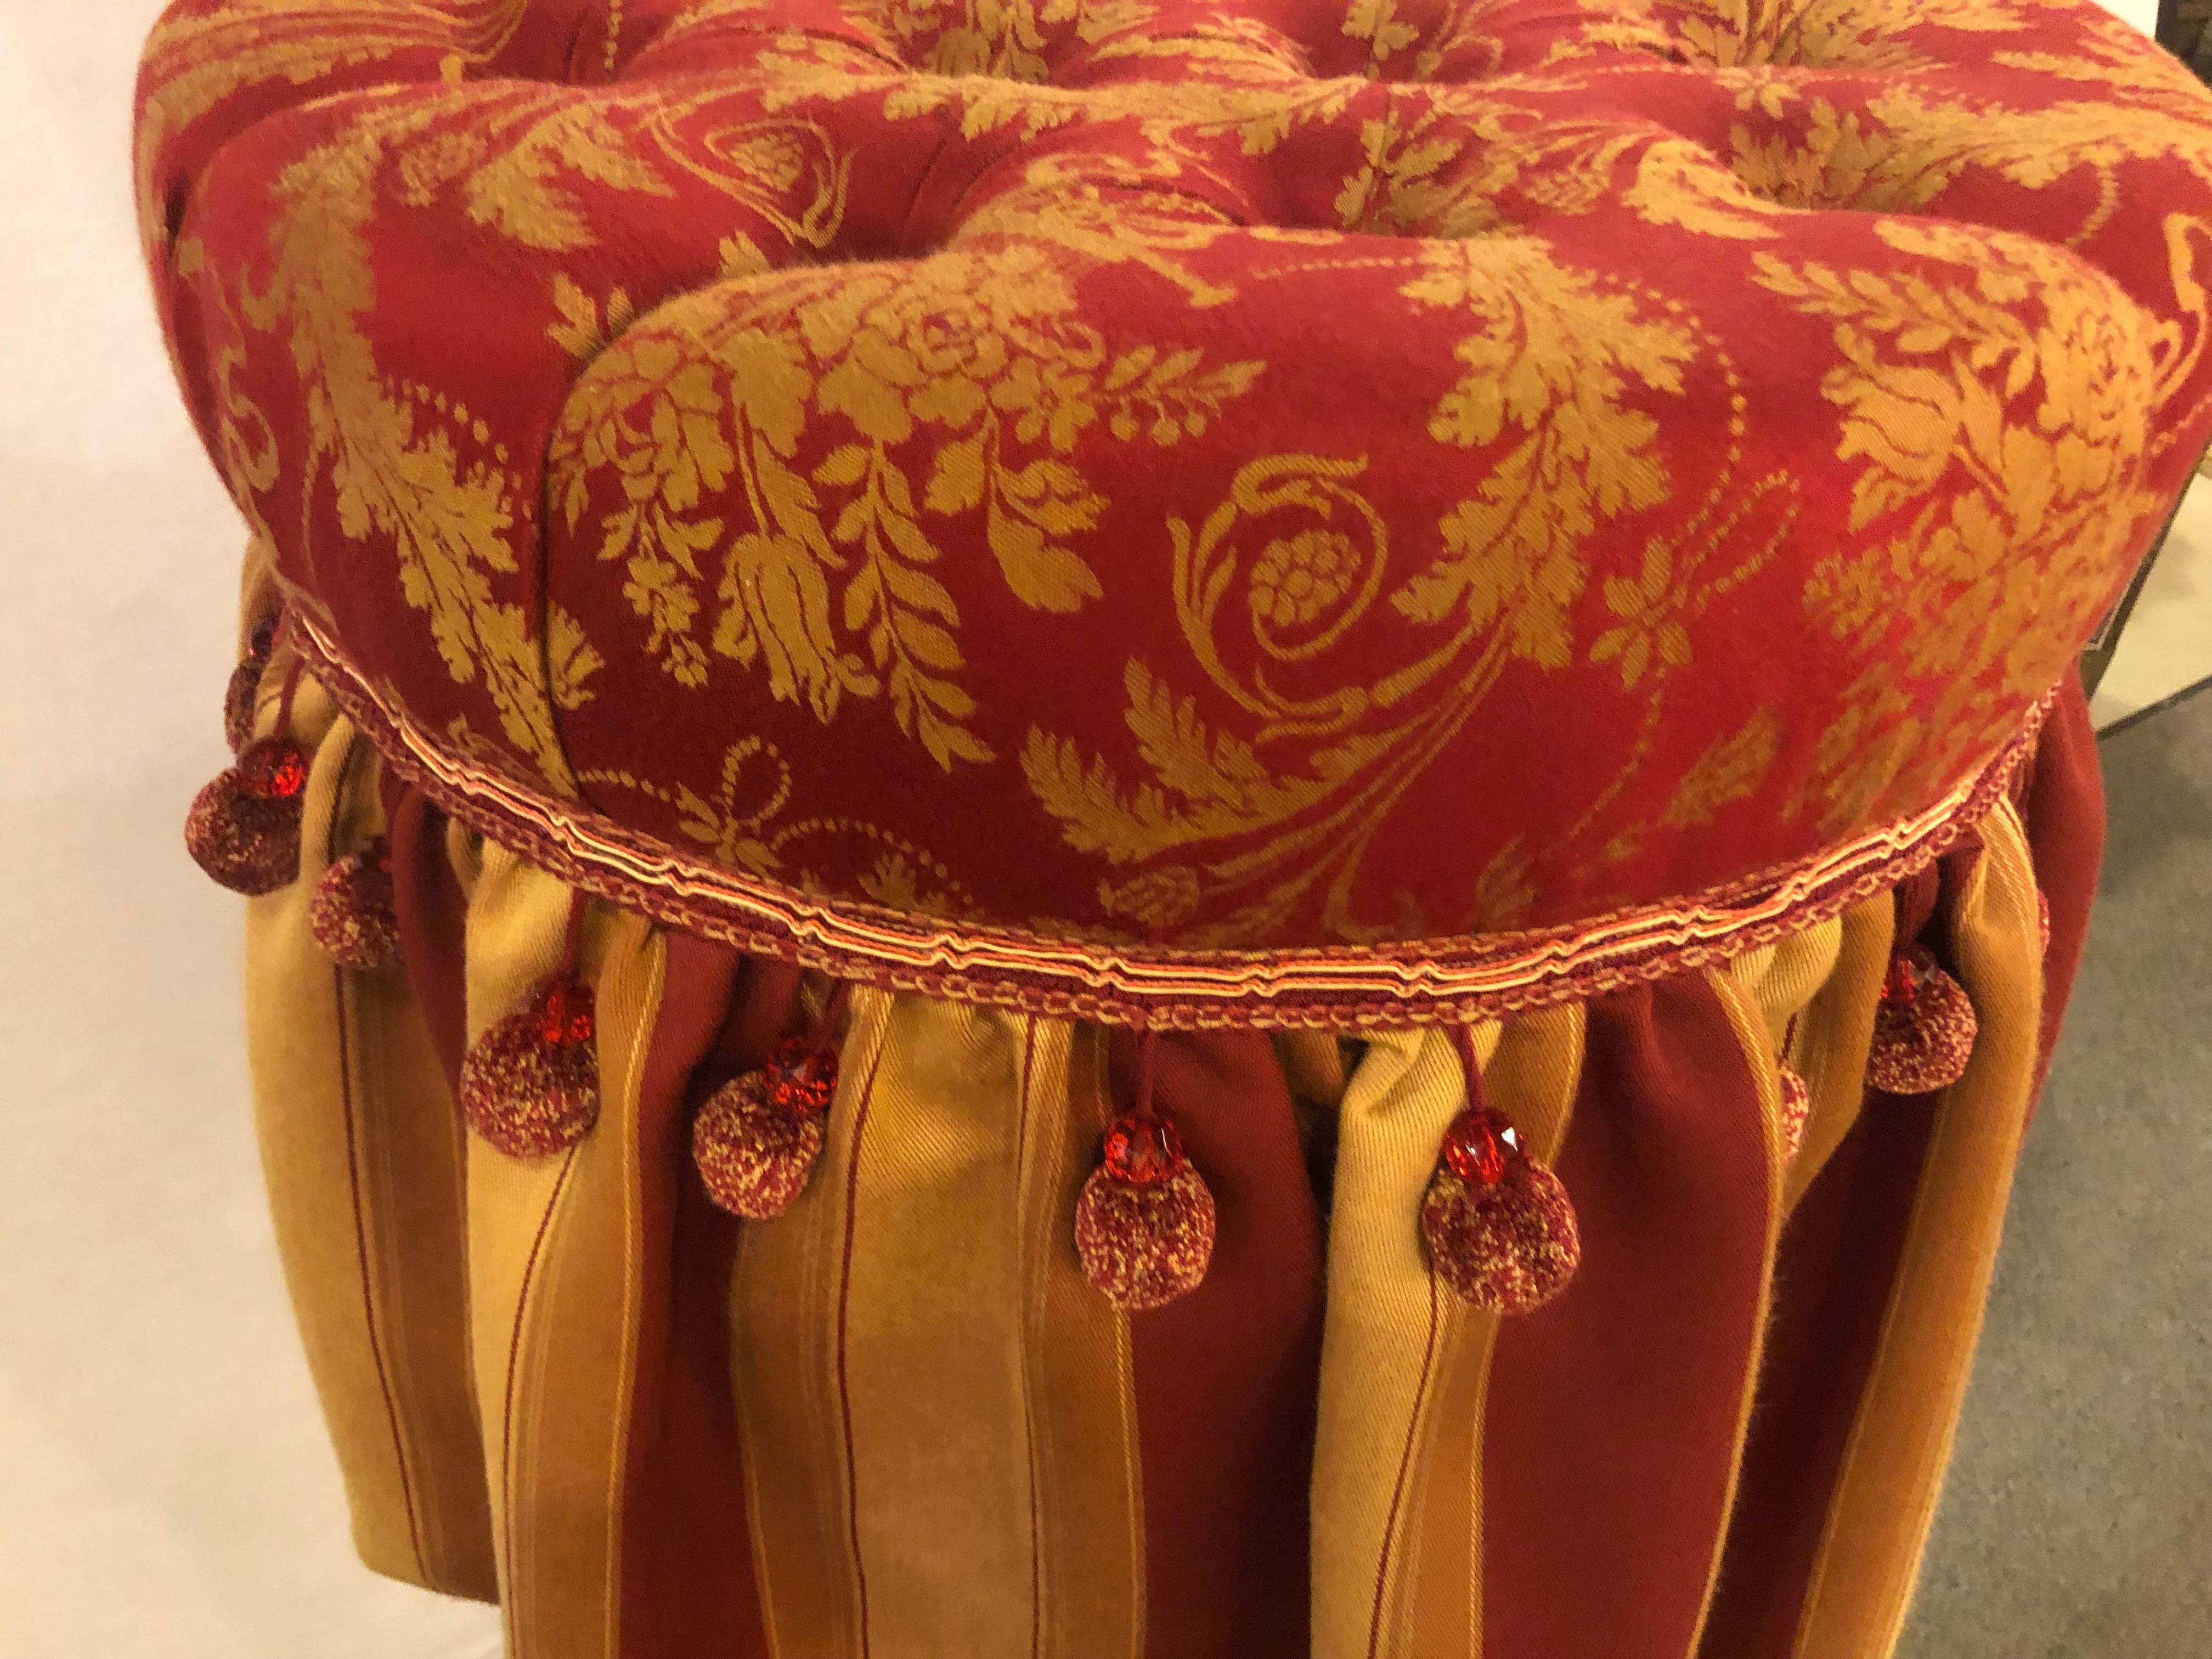 Hollywood Regency Deco Upholstered Tufted Red and Gilt Decorated Ottoman or Footstool